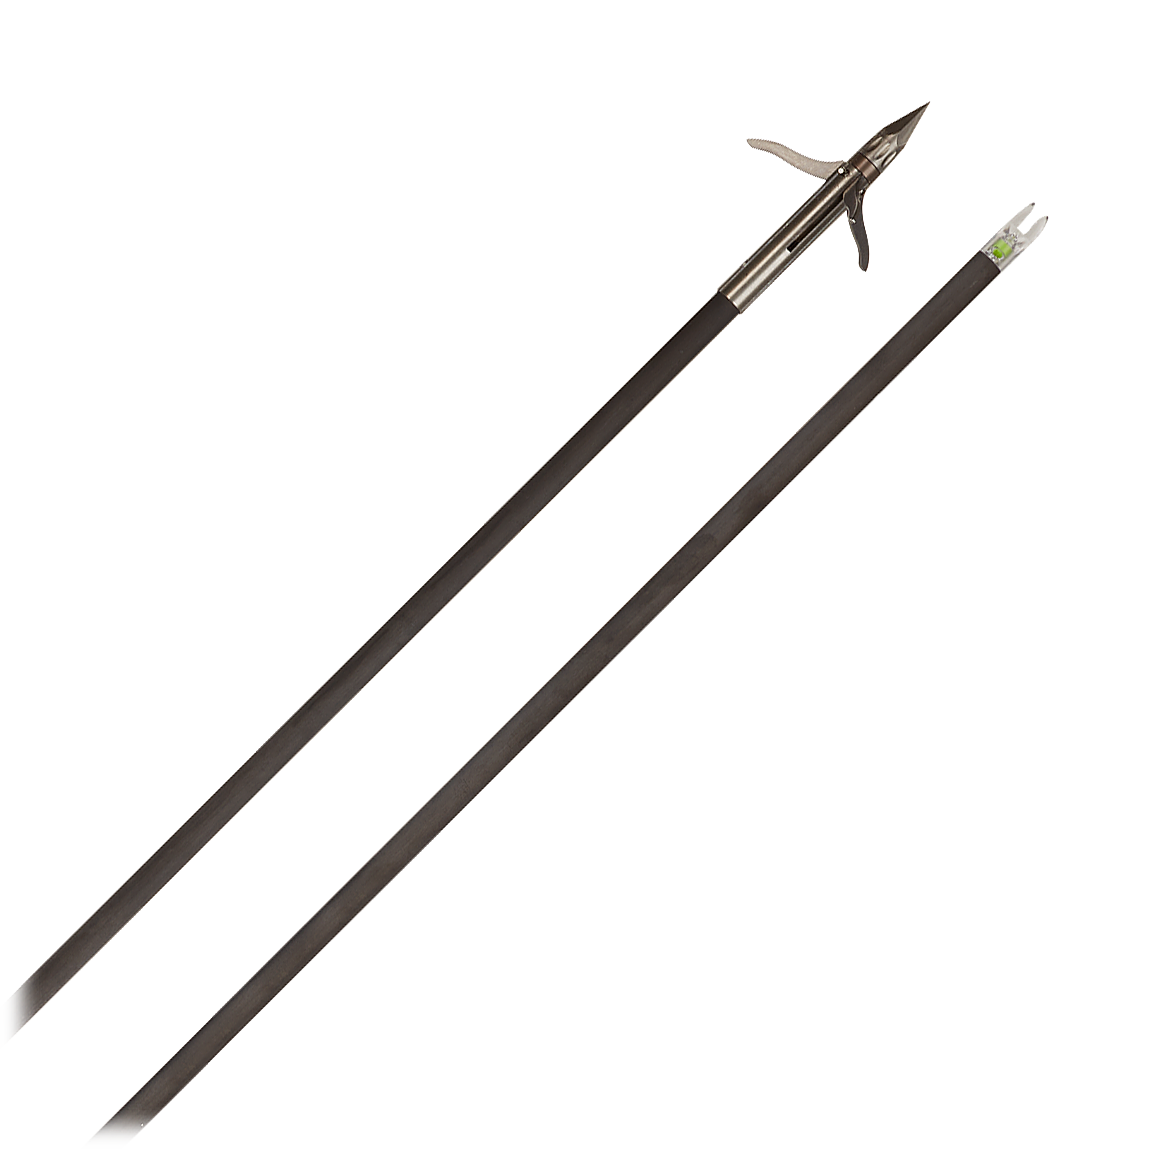  FeraDyne Muzzy Bowfishing Lighted Carbon Composite Fish Arrows  with Iron Barb 3-Blade with Bottle Slide Installed (1339-CBS) : Sports &  Outdoors